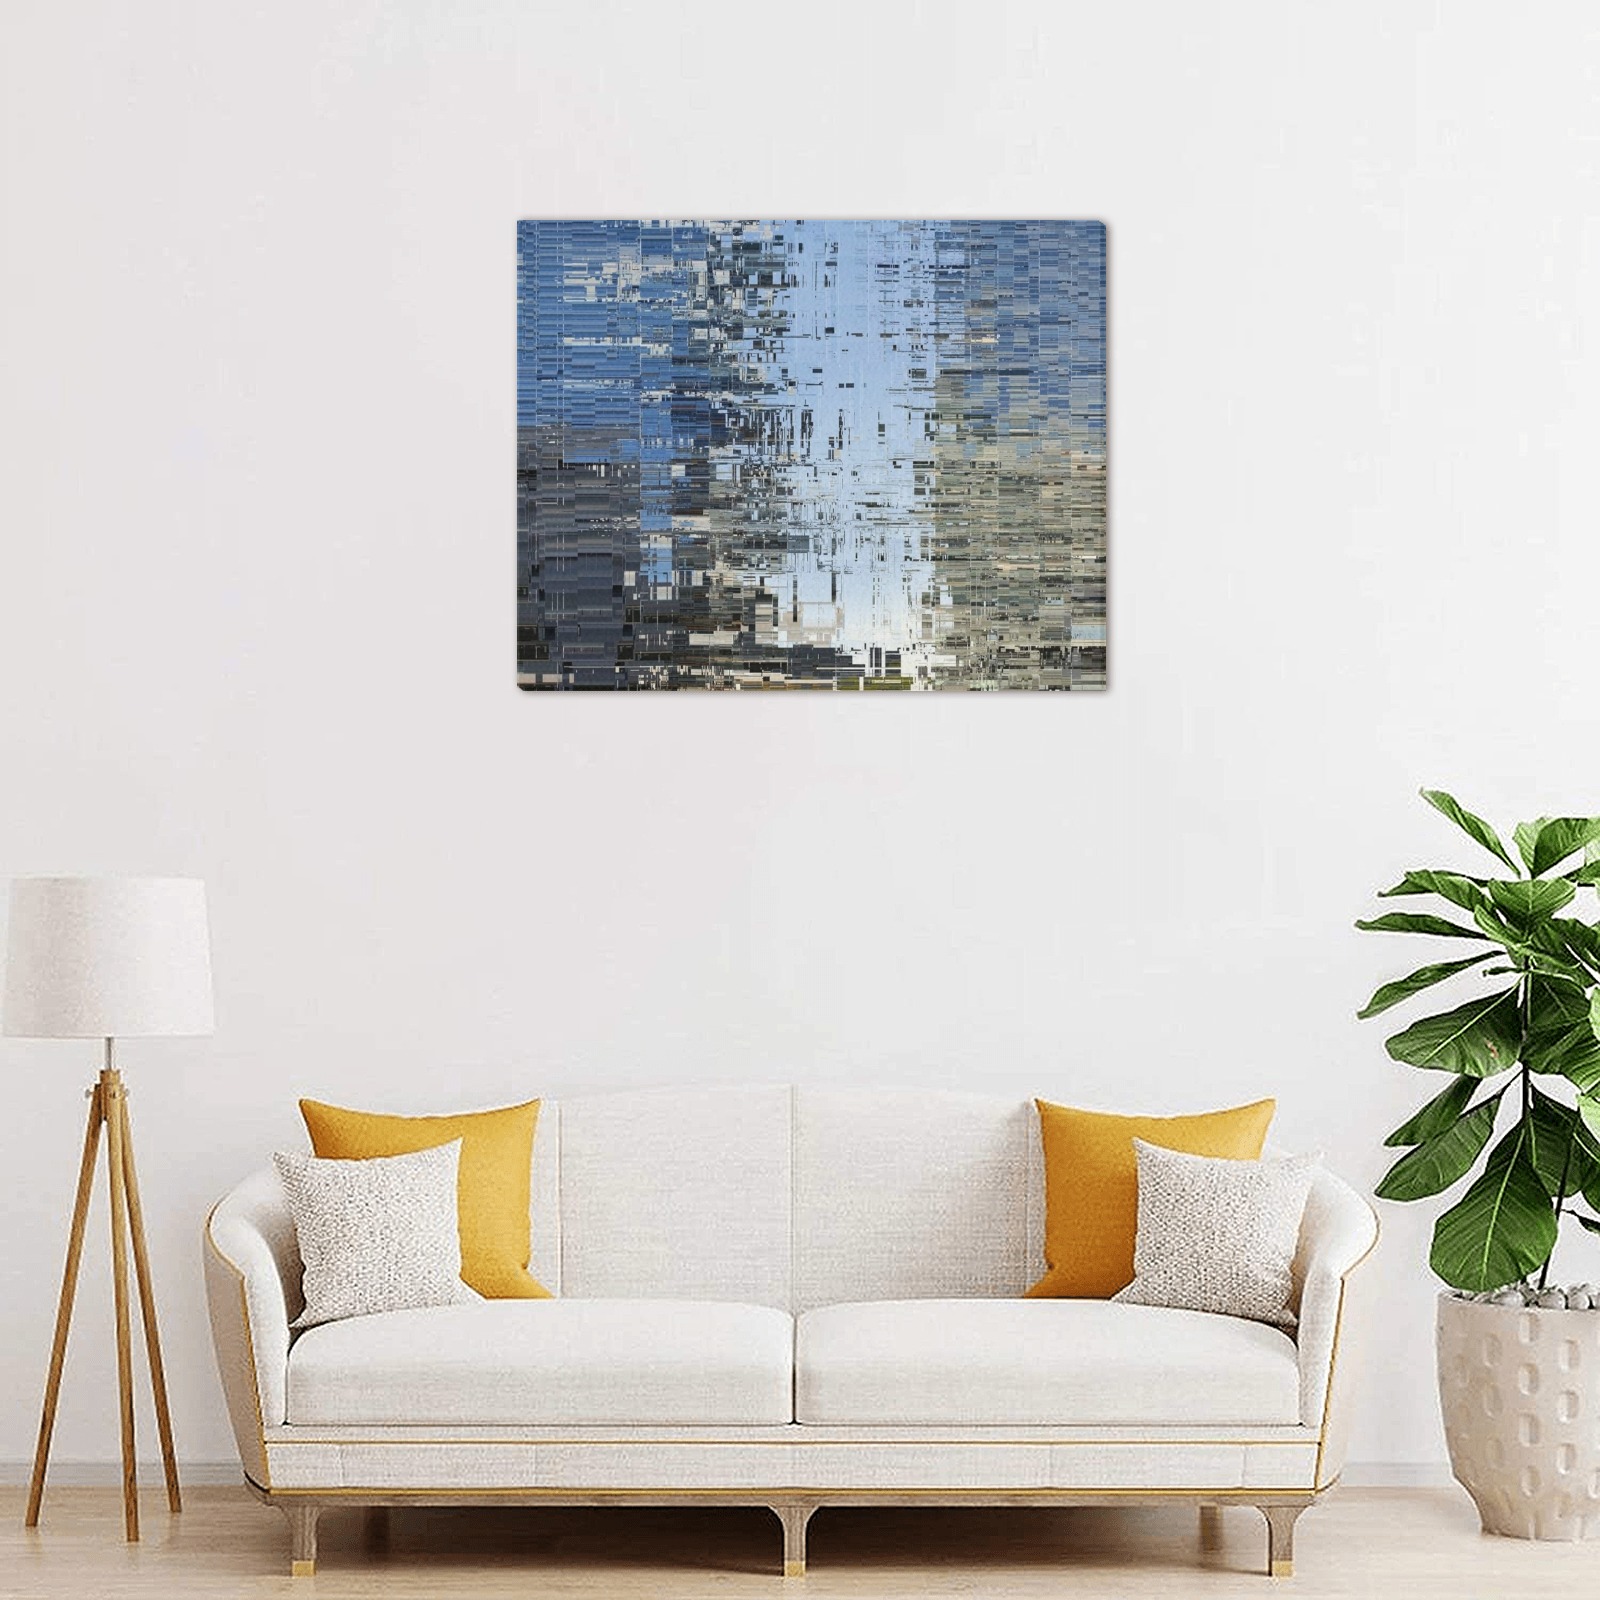 Abstract Frame Canvas Print 20"x16"